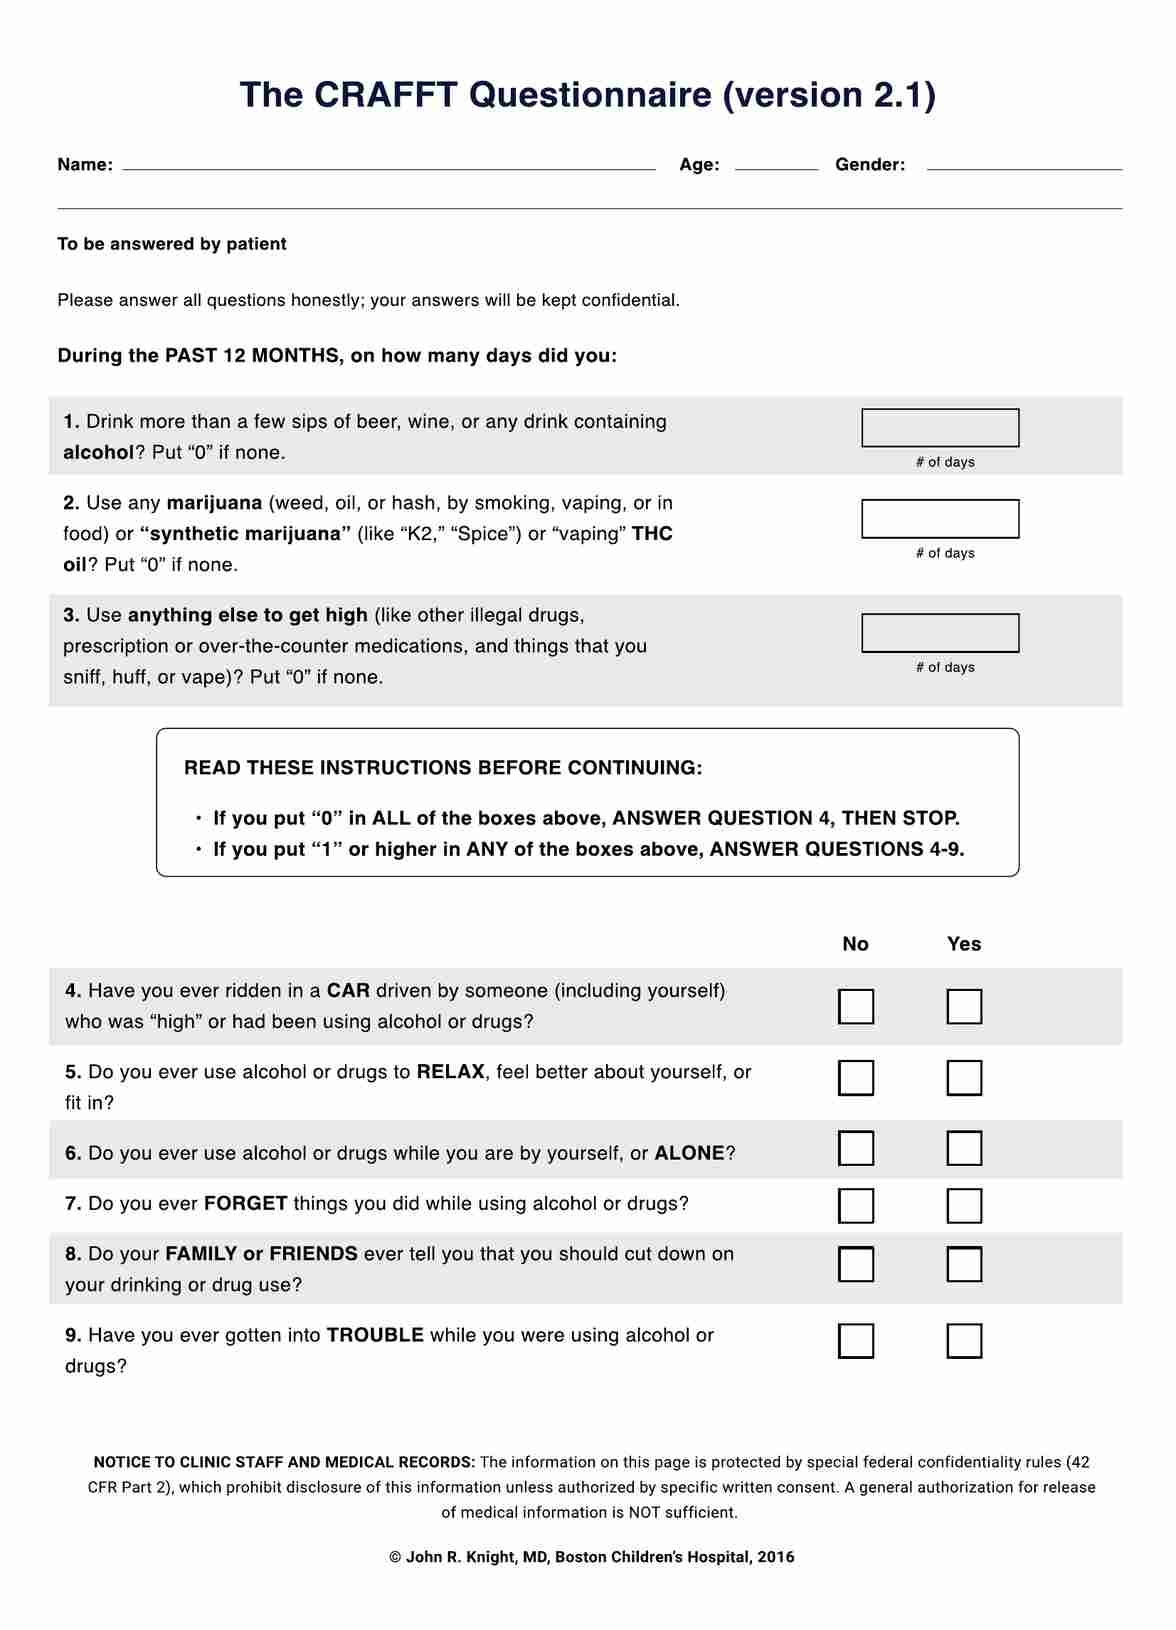 CRAFFT Questionnaires PDF Example